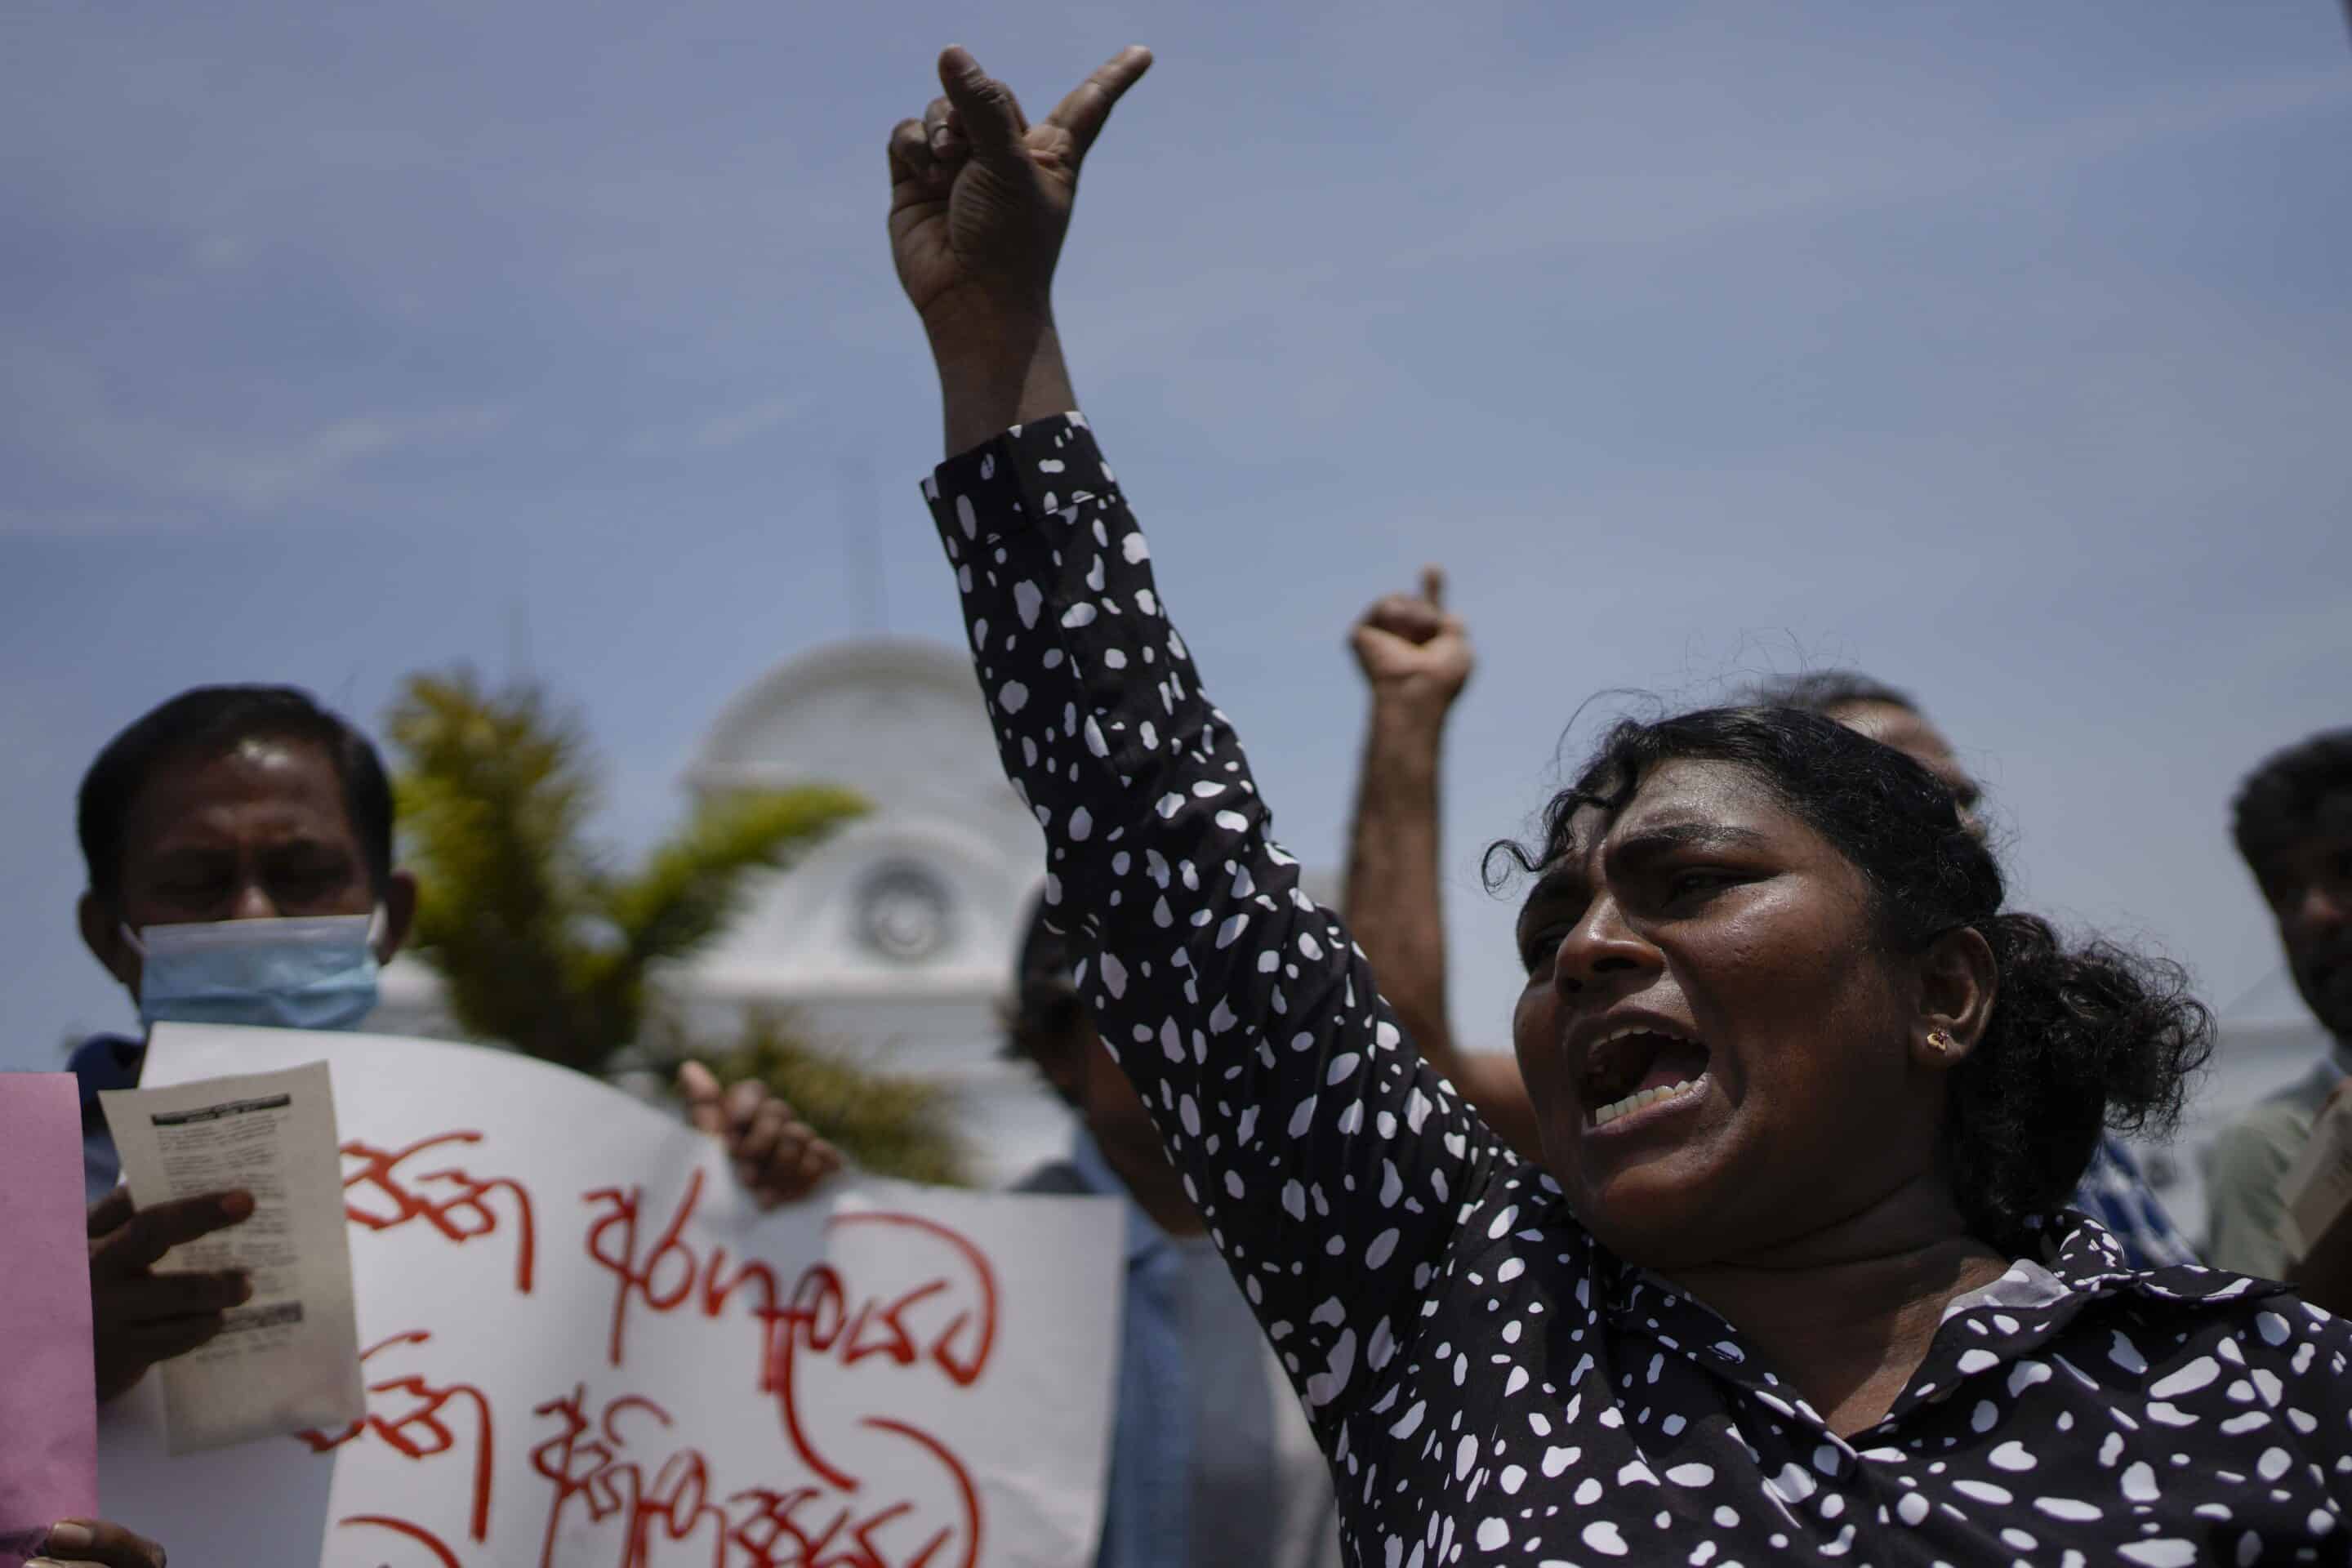 An anti government protester shouts slogans against the recent military eviction of their protest camp outside president's office in Colombo, Sri Lanka, Wednesday, July 27, 2022. (AP Photo/Eranga Jayawardena)/EJX103/22208448246560//2207271434